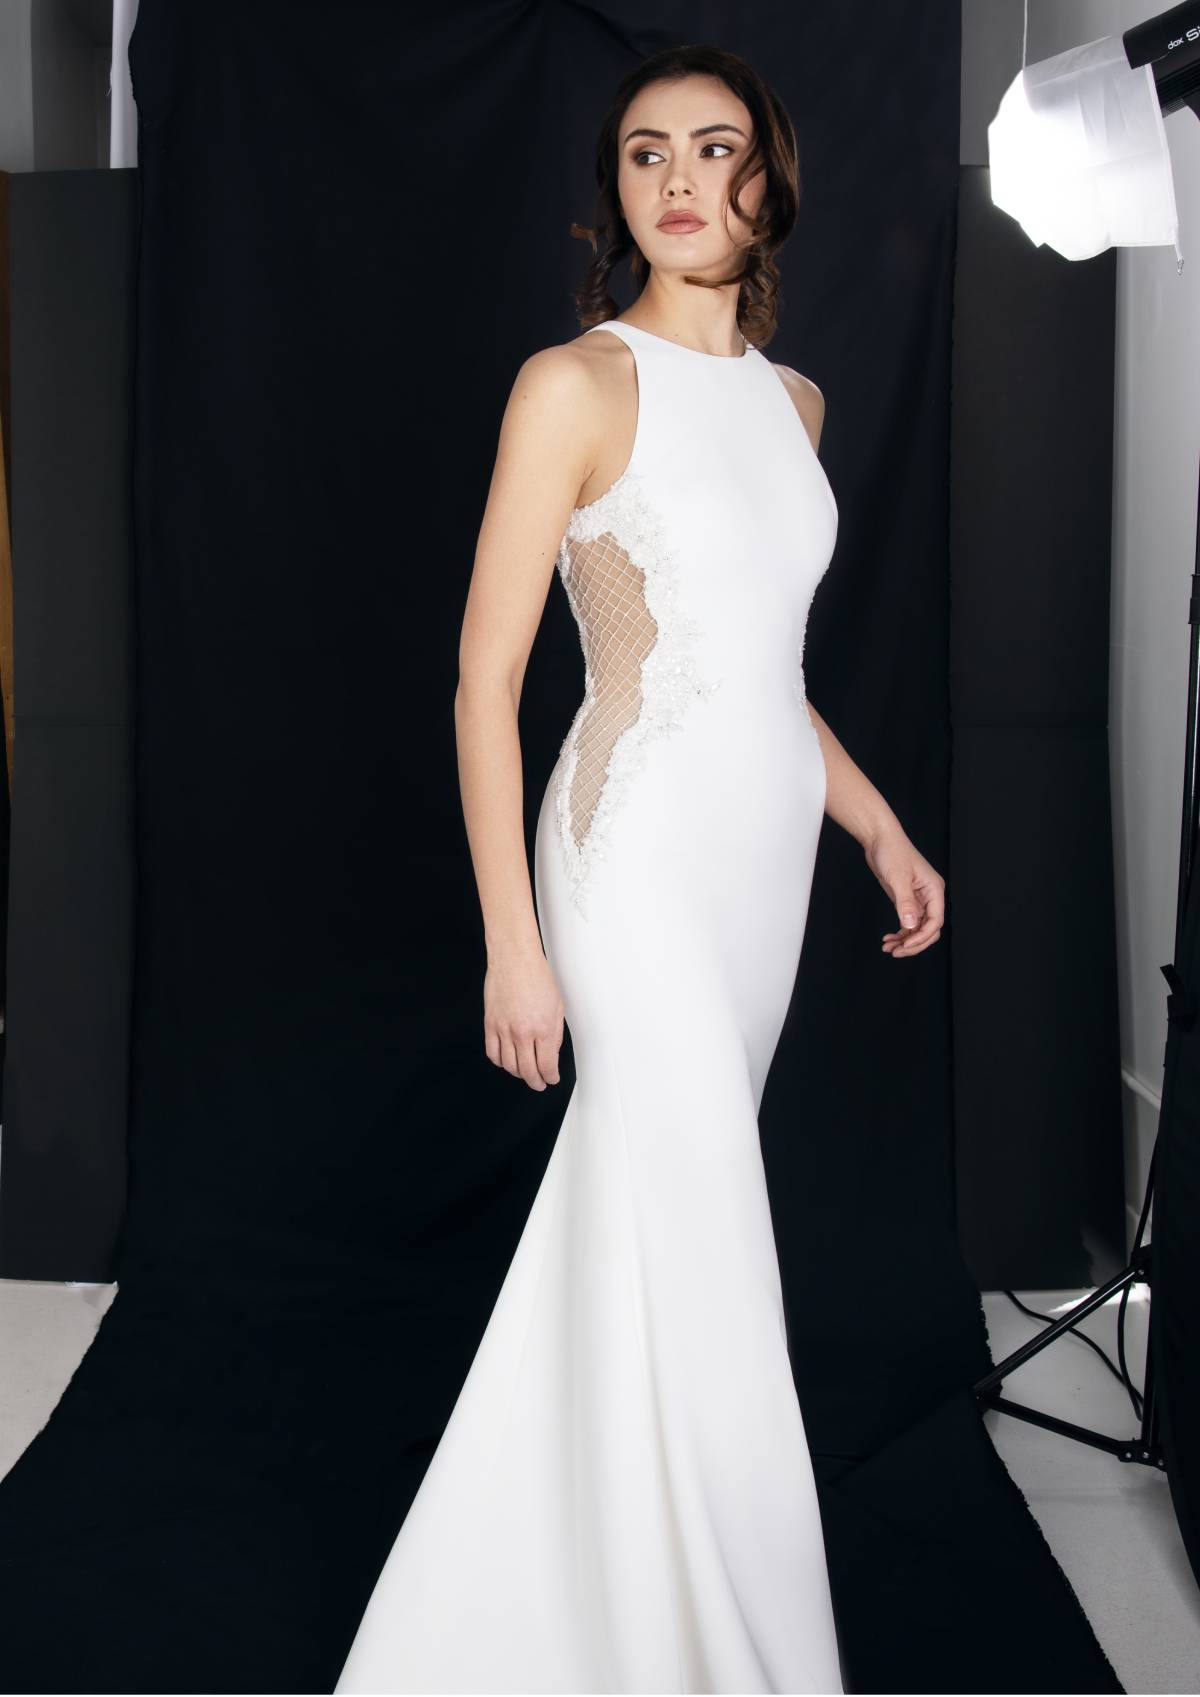 Bride Dress Model Aida - Halter gown with embroidery inserts - Verdin New York